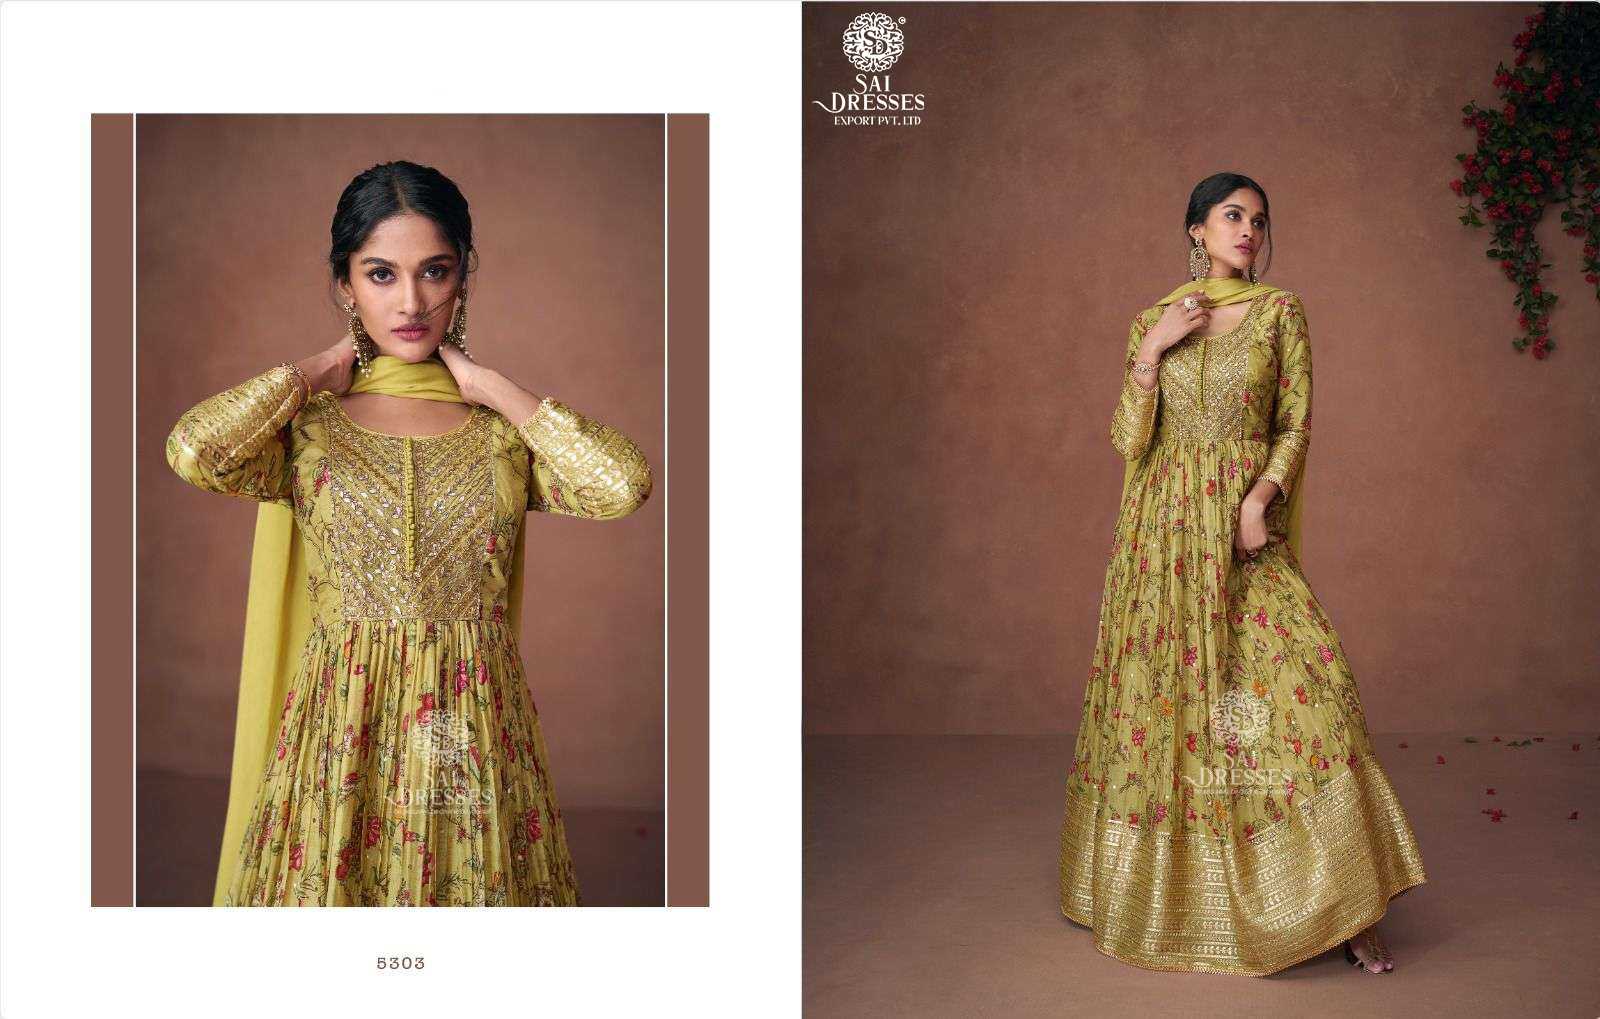 SAI DRESSES PRESENT NOORIAT READYMADE FESTIVE WEAR DESIGNER LONG GOWN WITH DUPATTA IN WHOLESALE RATE IN SURAT